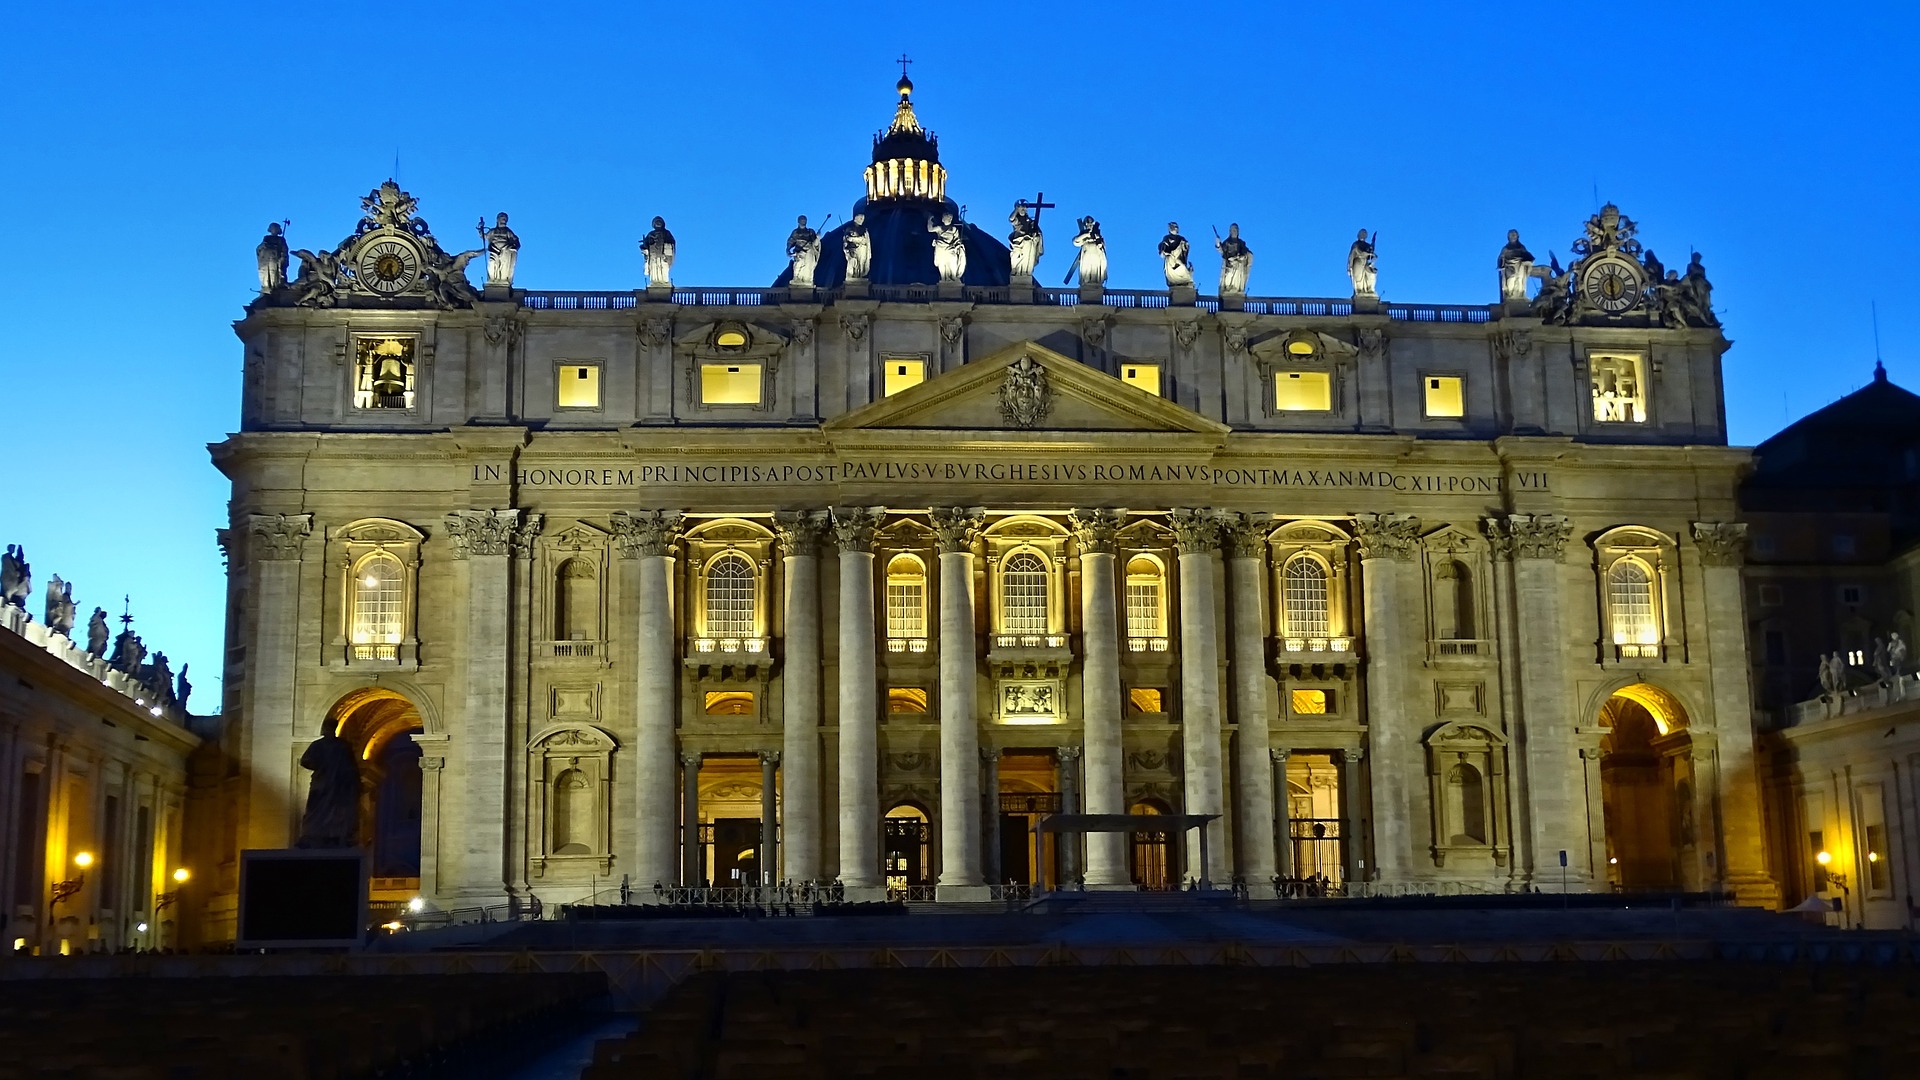 St. Peter’s Basilica in Vatican City, Rome, Italy